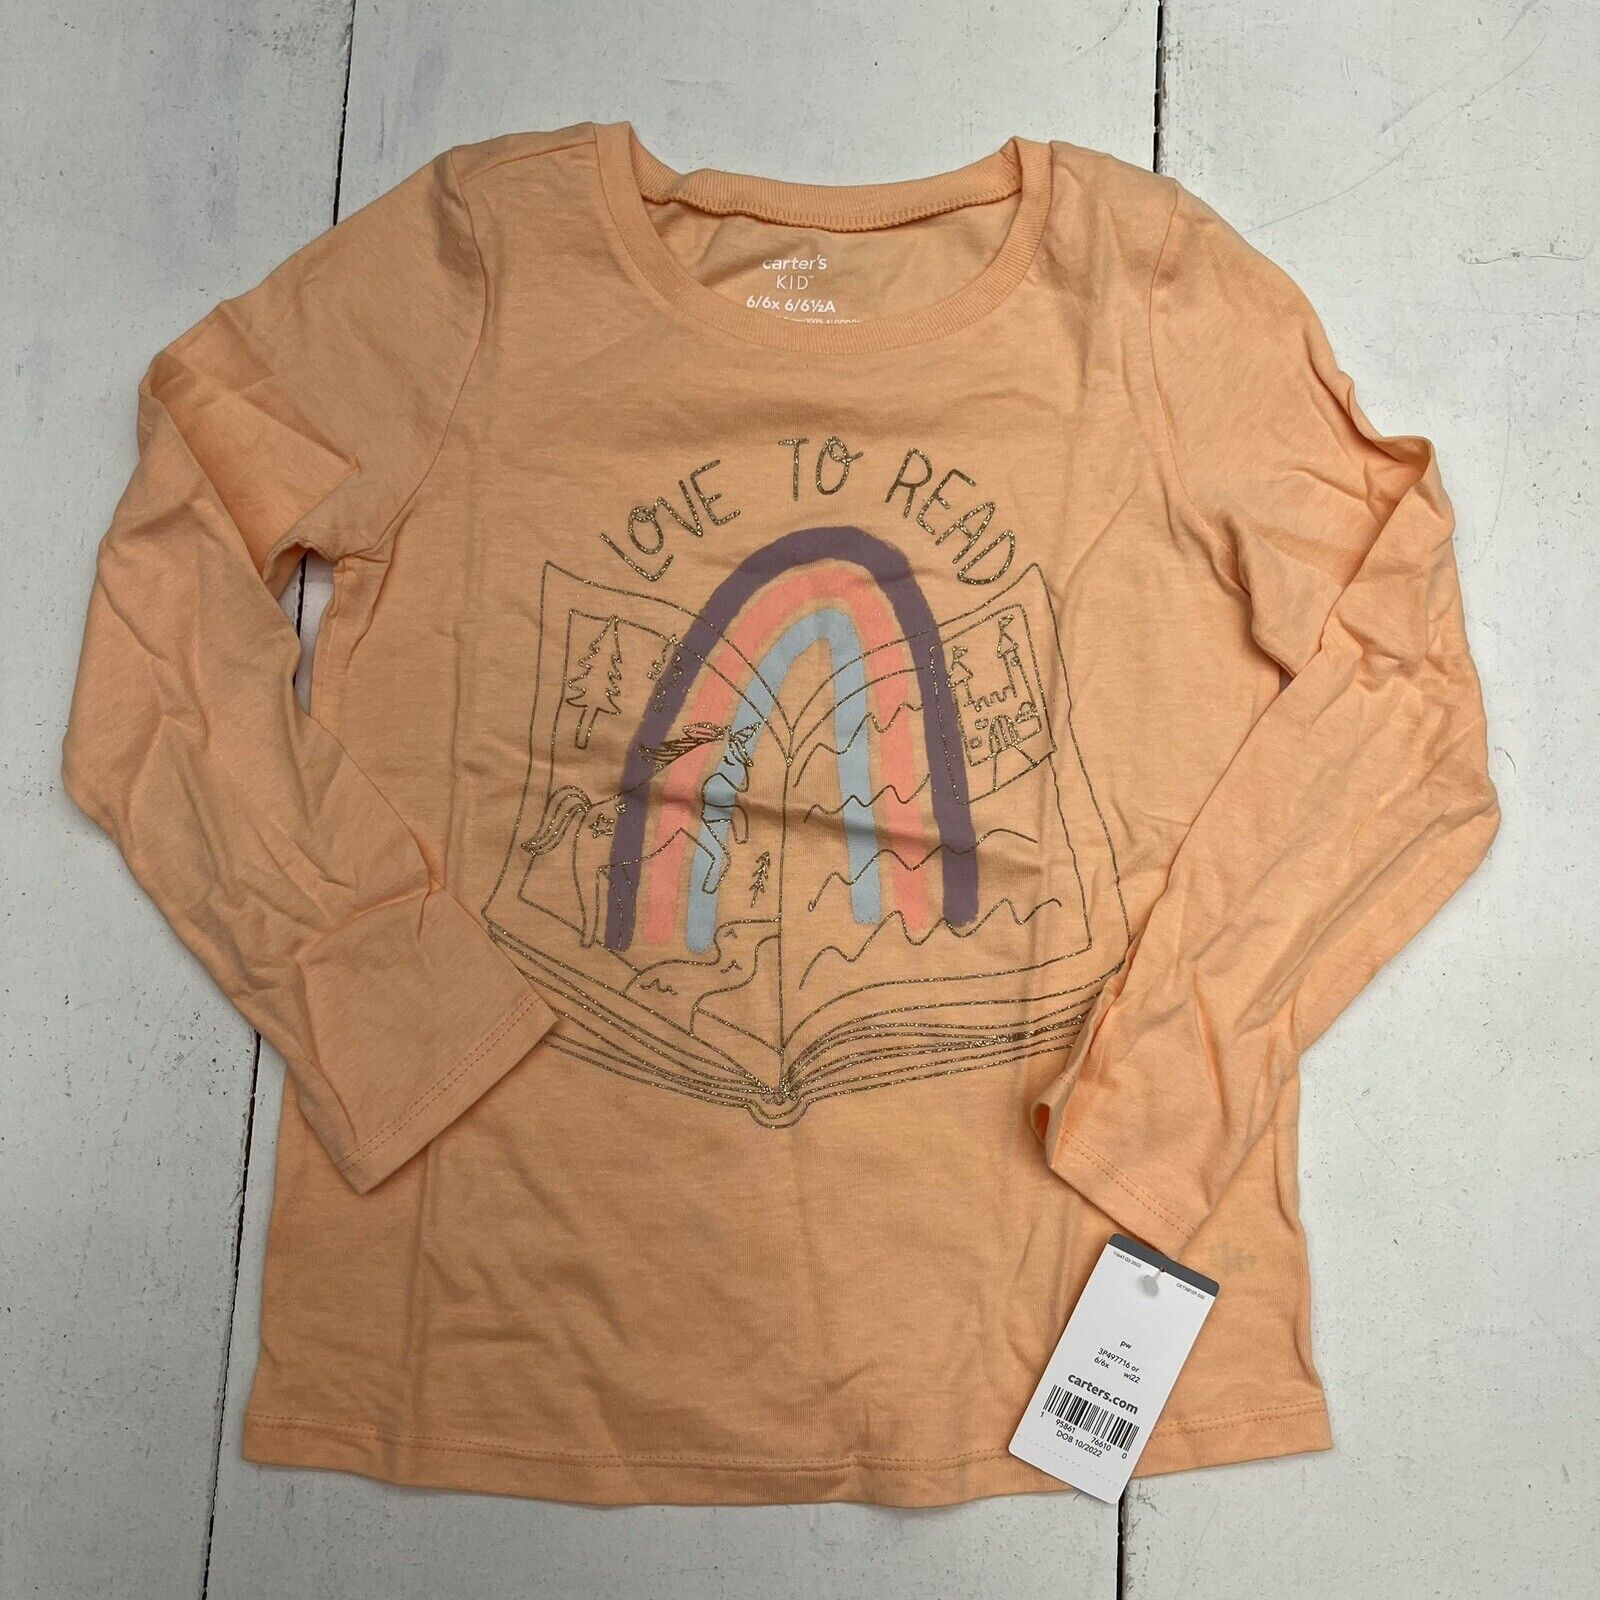 Carters Orange “love to read” Graphic Print Long Sleeve T-Shirt Girls Size 6 NEW